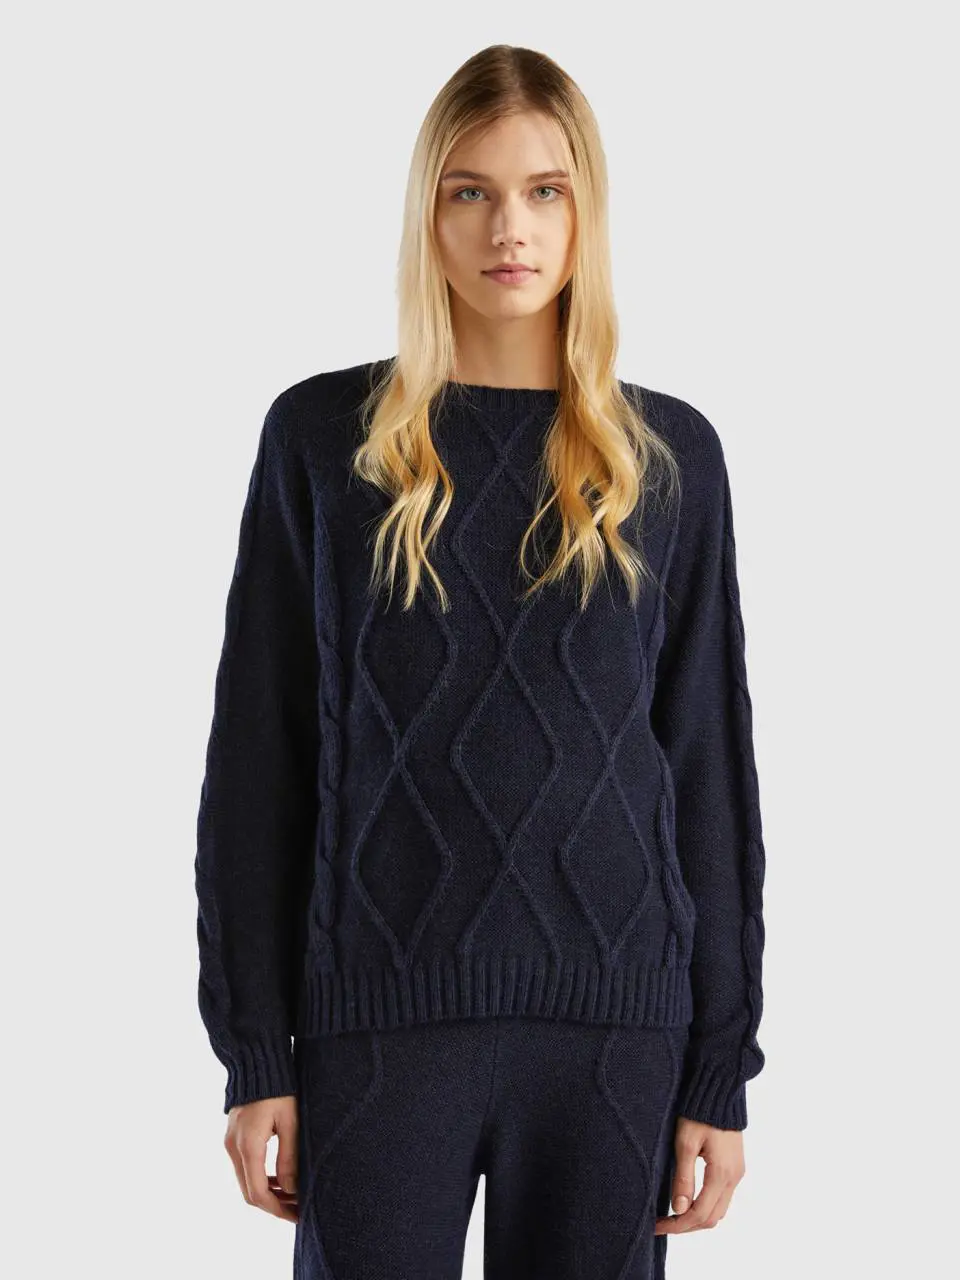 Benetton sweater with cables and diamonds. 1